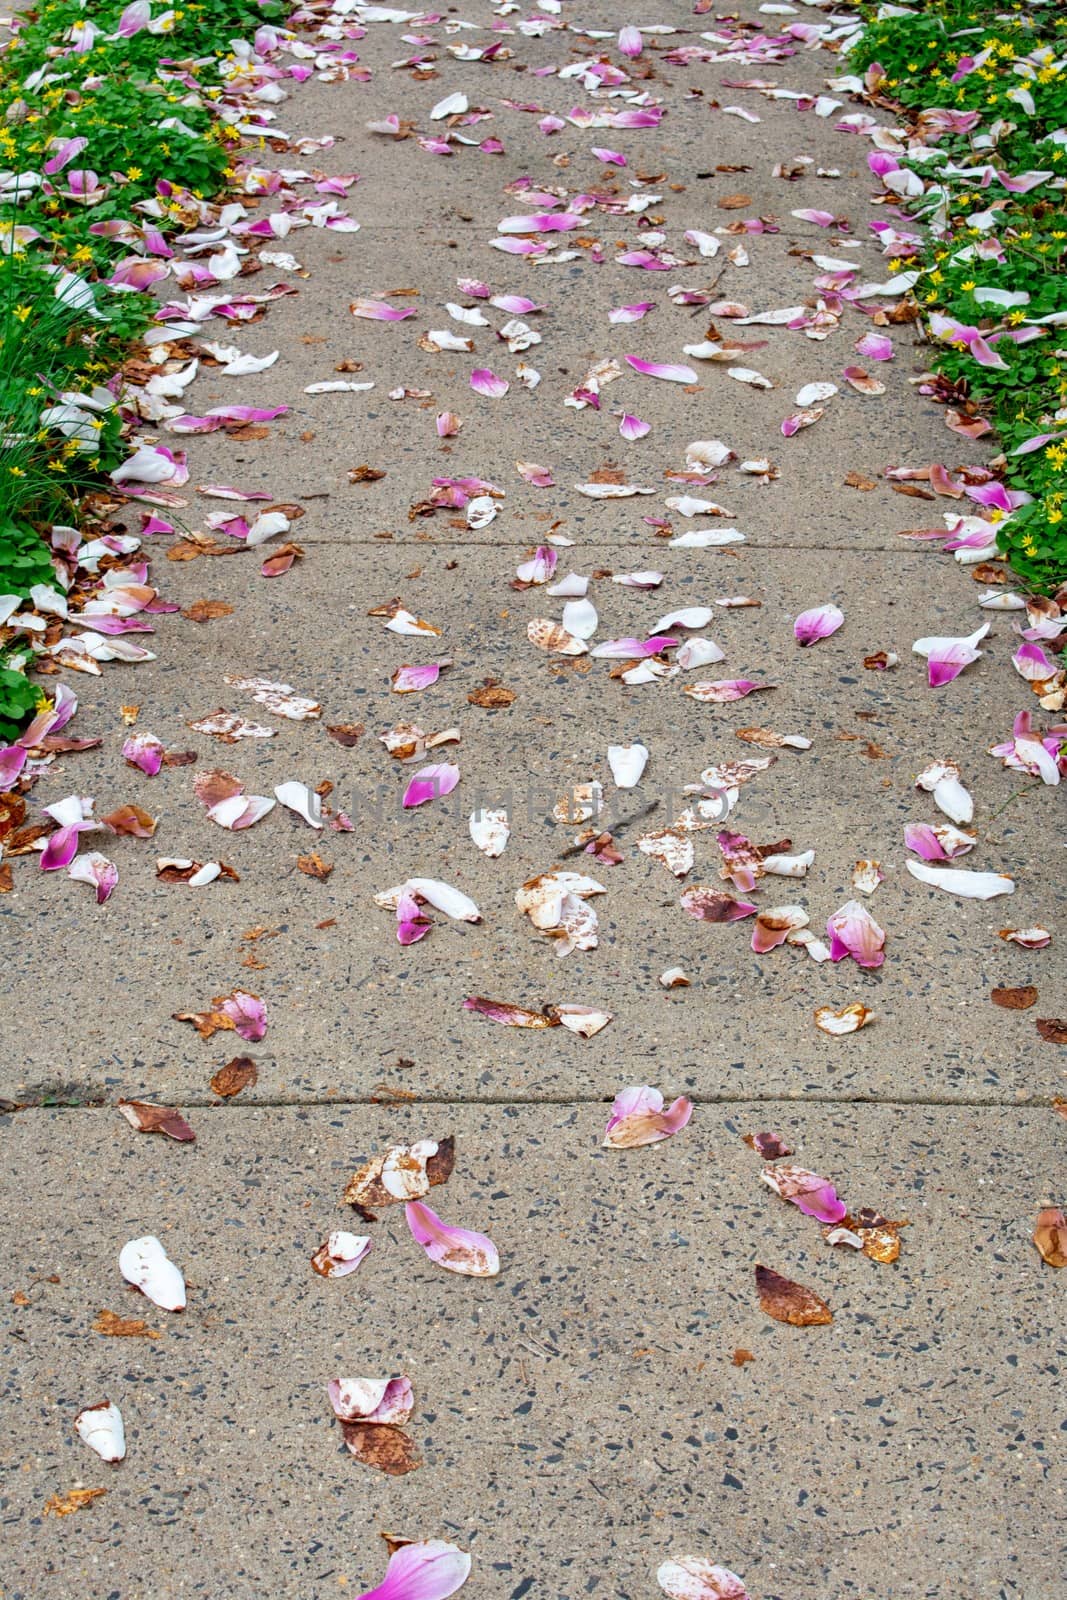 A Sidewalk Covered in Pink Petals During the Spring by bju12290